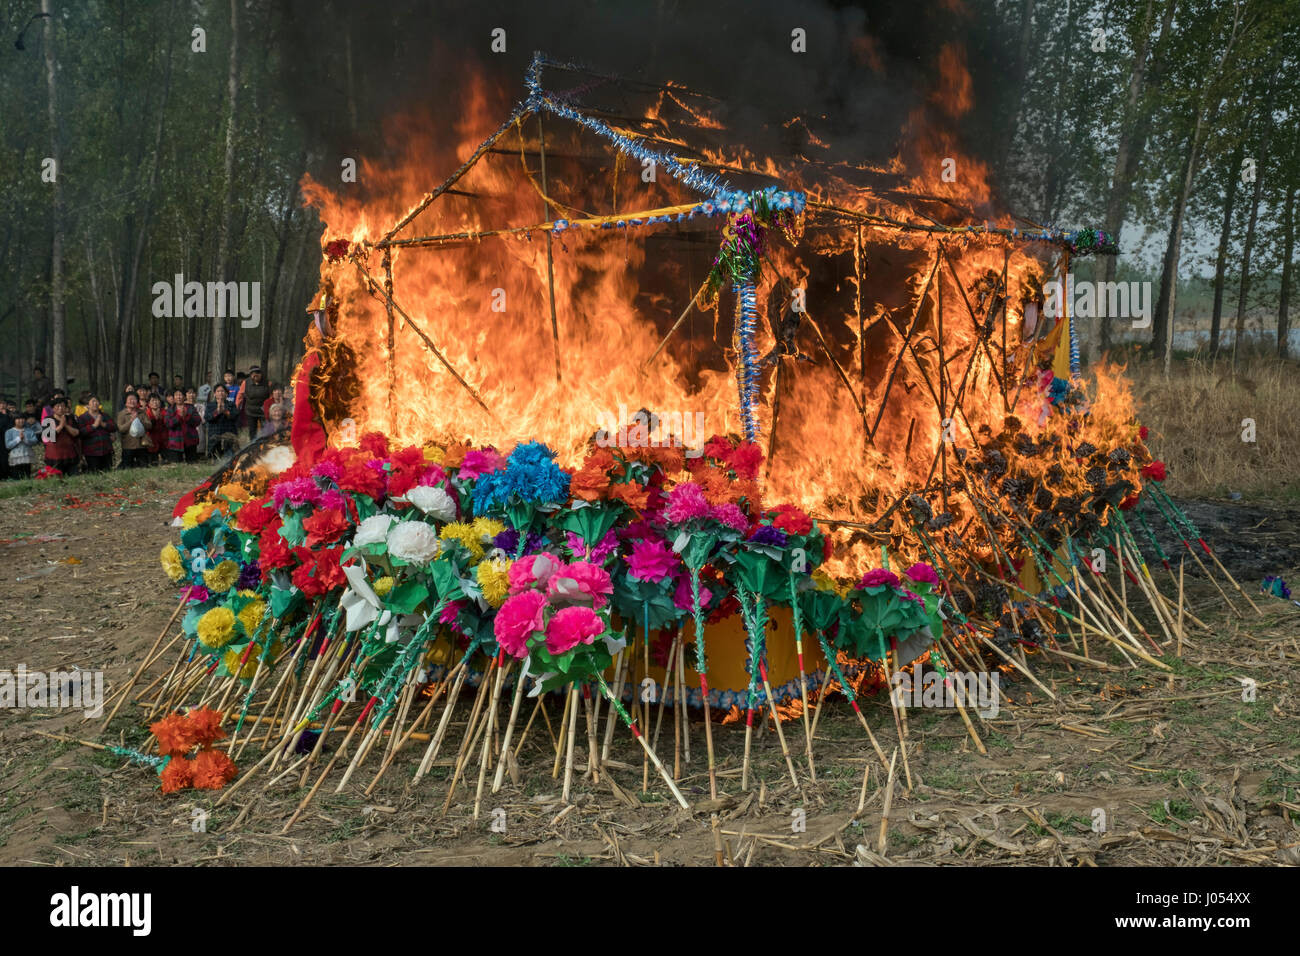 Local villagers burn up the shrine while attending an annual Taoism ceremony to celebrate the birthday of Bixia Yuanjun, known as the 'Lady of Mount Tai”, one of the most important Taoism goddesses in Northern China, in Liutong village, Rongcheng county, one of the three counties composing Xiongan New Area in Hebei Province, China on April 09, 2017. With Chinese government suddenly announced the location of the special economic zone (SEZ) which would effectively serve as an extension of capital Beijing one week ago, such ceremony of Liutong maybe the last one. Stock Photo